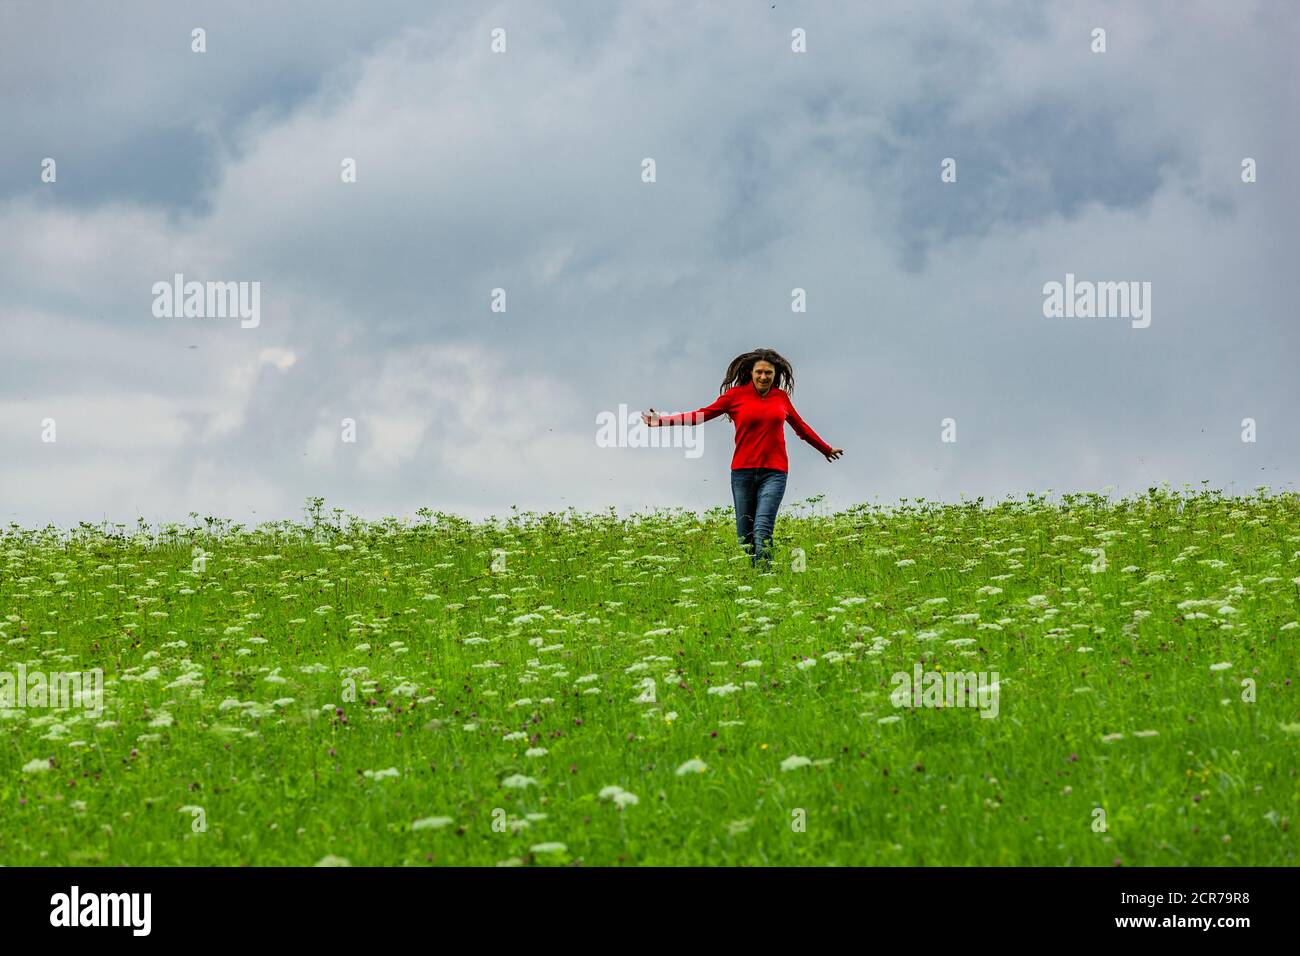 Woman with red sweatshirt jumps in green meadow Stock Photo